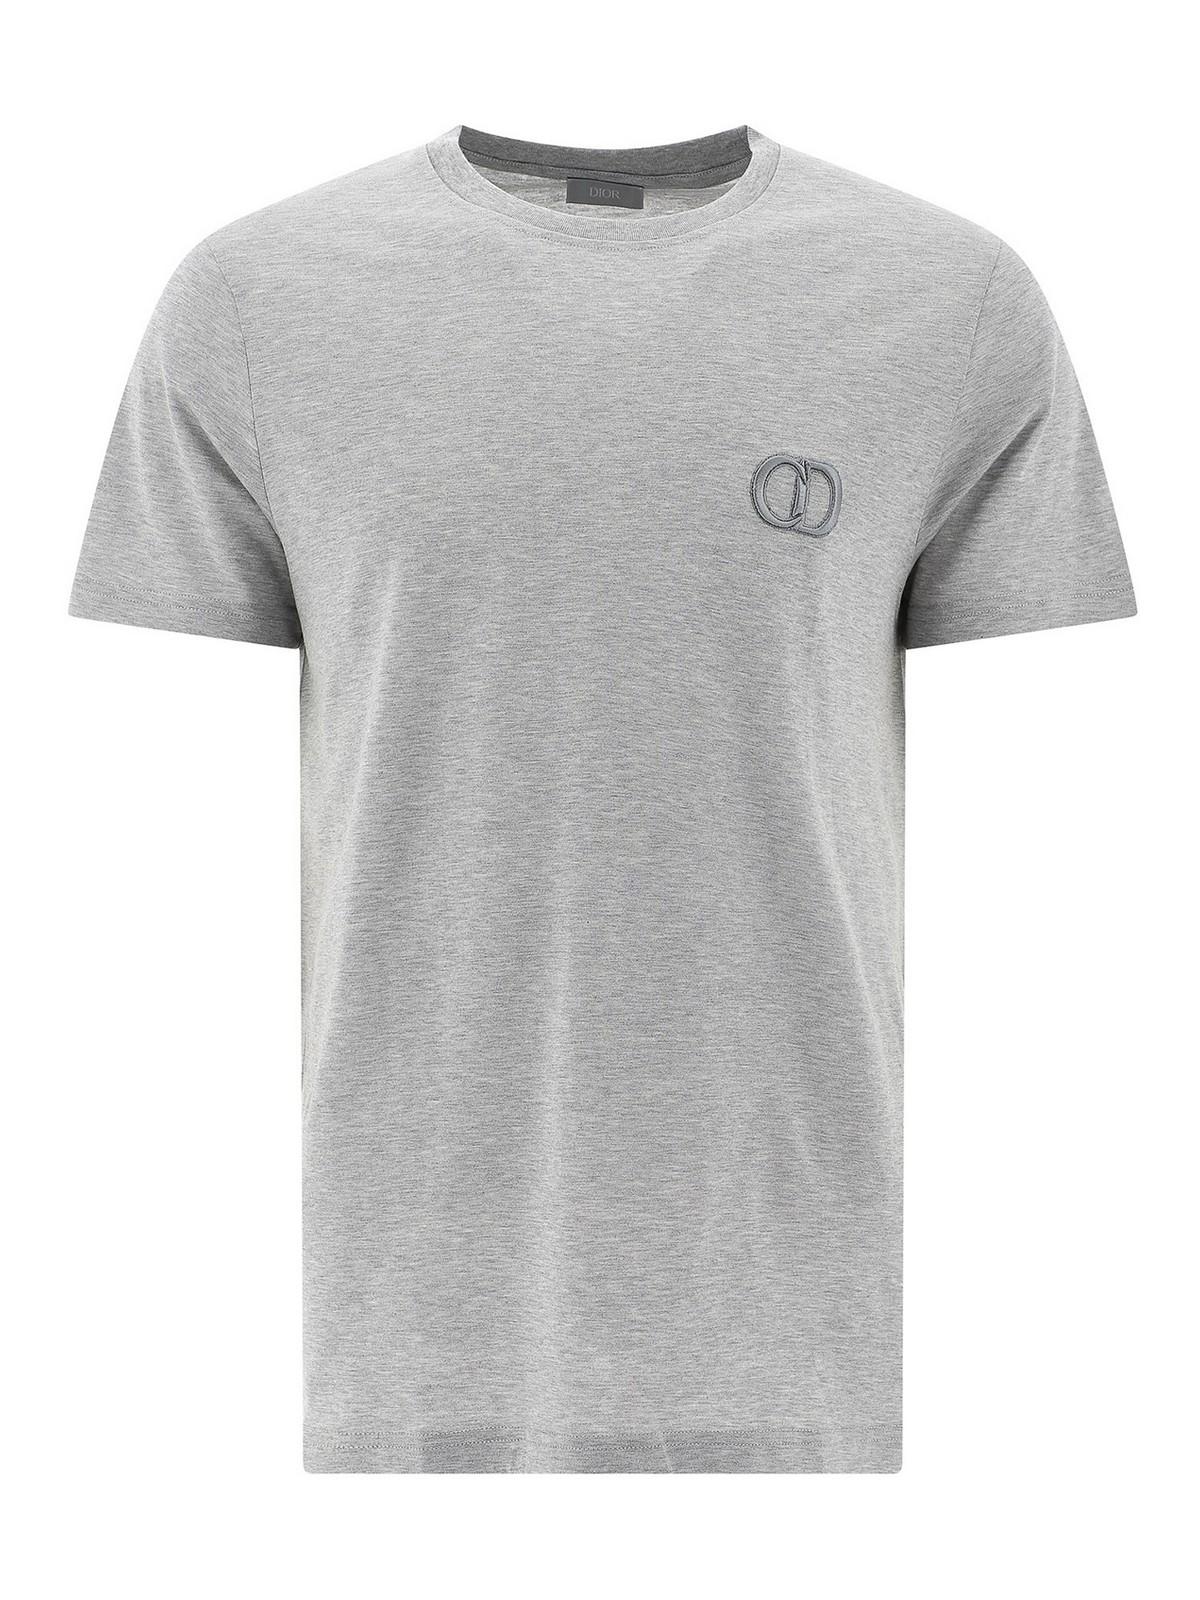 Dior Cd Icon Logo Embroidery T-shirt in Grey (Gray) for Men - Lyst